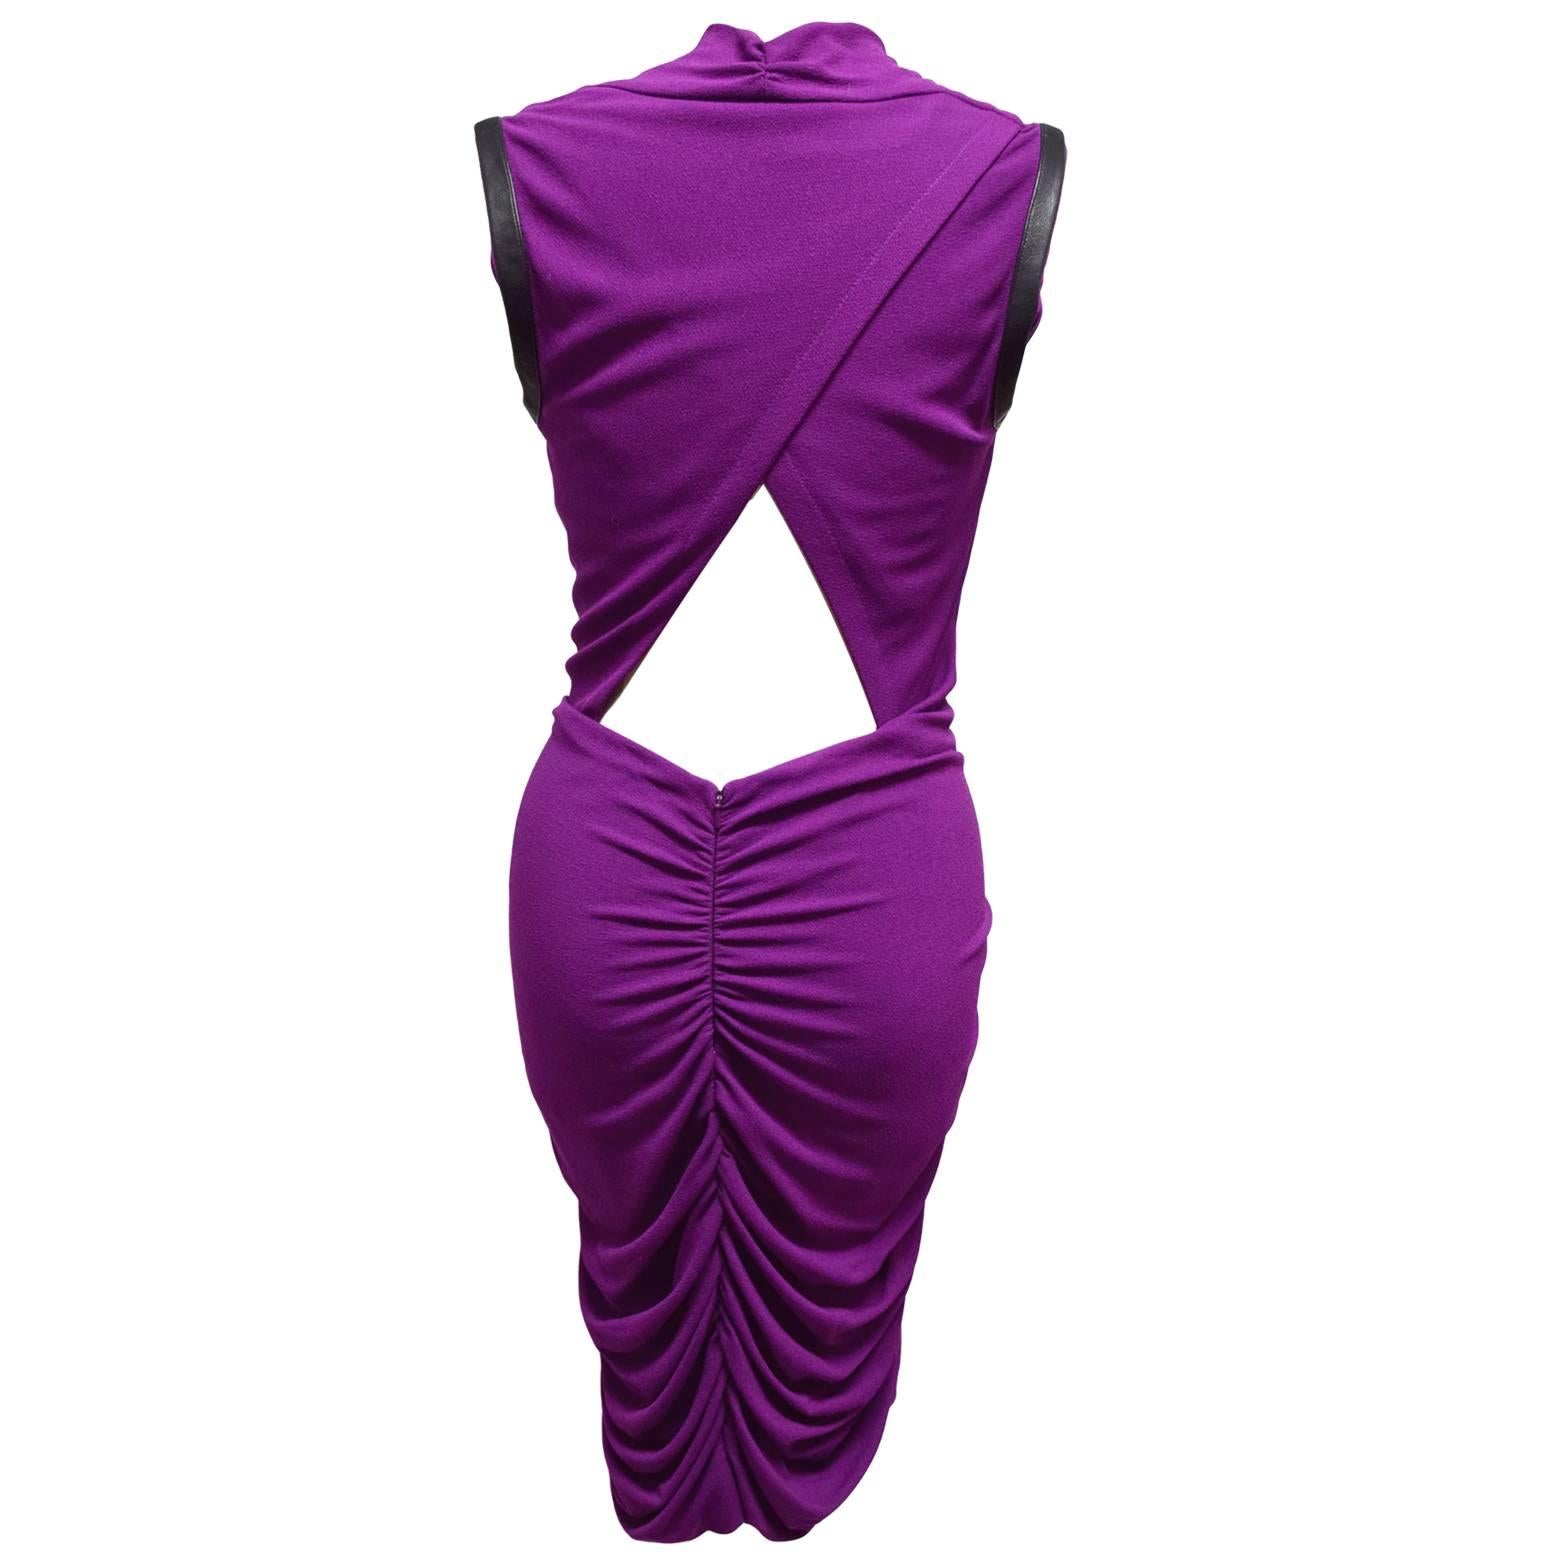 This dress by Yigal Azrouël is a polyester stretch blend dress in barney and is a bodycon shape with hip gathers. The neckline is a cowl neck, and the back is cutout. Lastly there is leather trimming on the sides of the shoulders. 